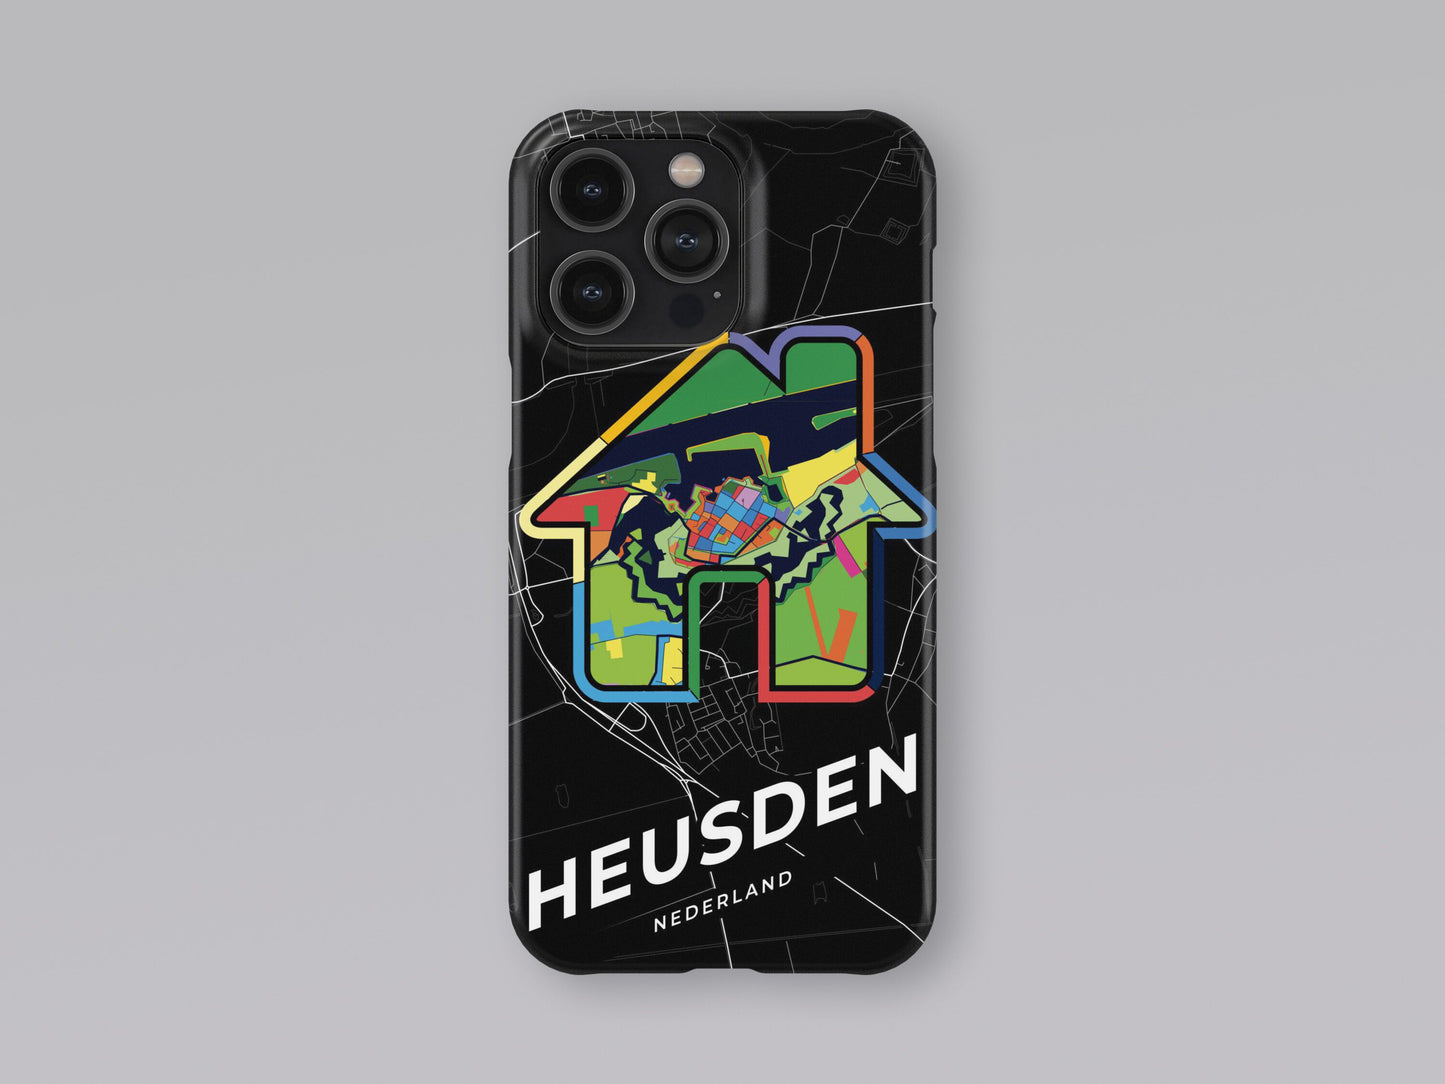 Heusden Netherlands slim phone case with colorful icon. Birthday, wedding or housewarming gift. Couple match cases. 3